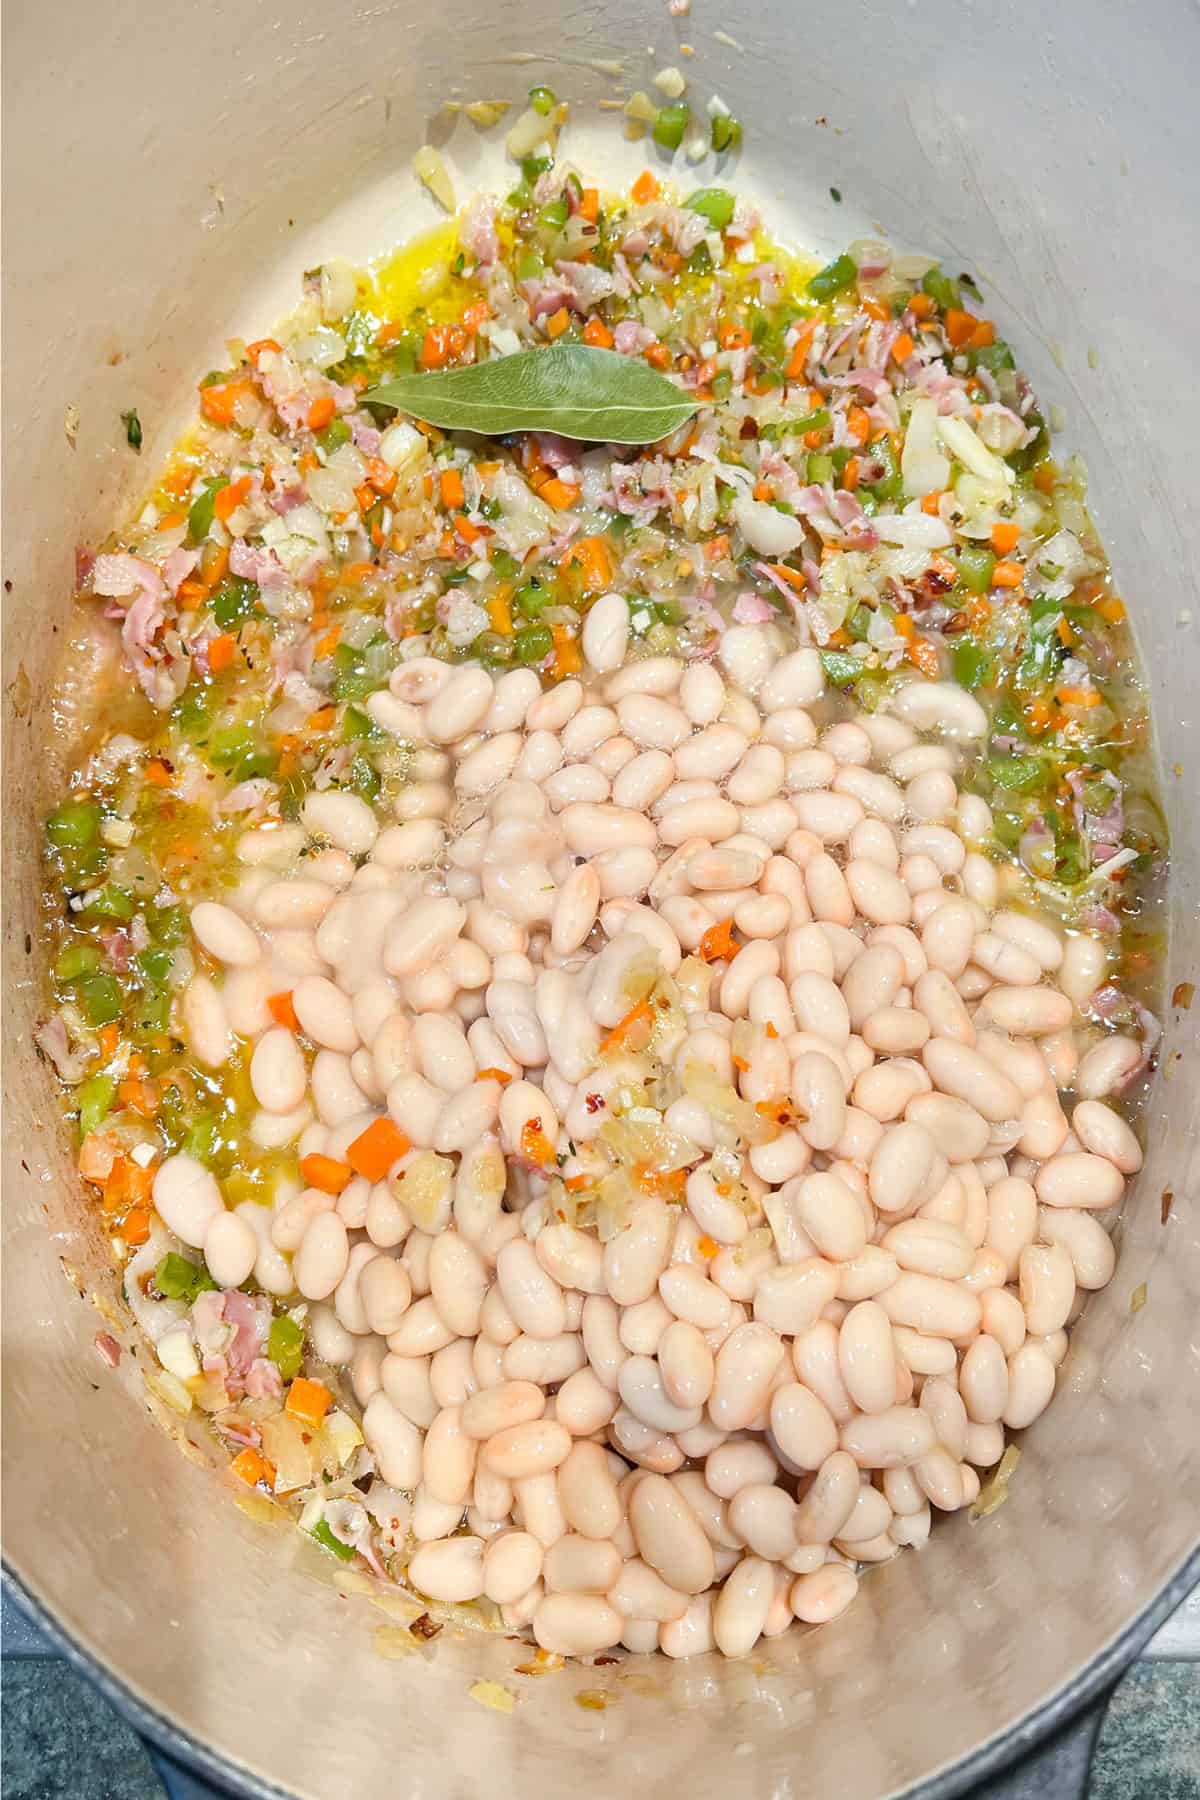 sautéd aromatic vegetables in a Dutch oven with canned white beans added